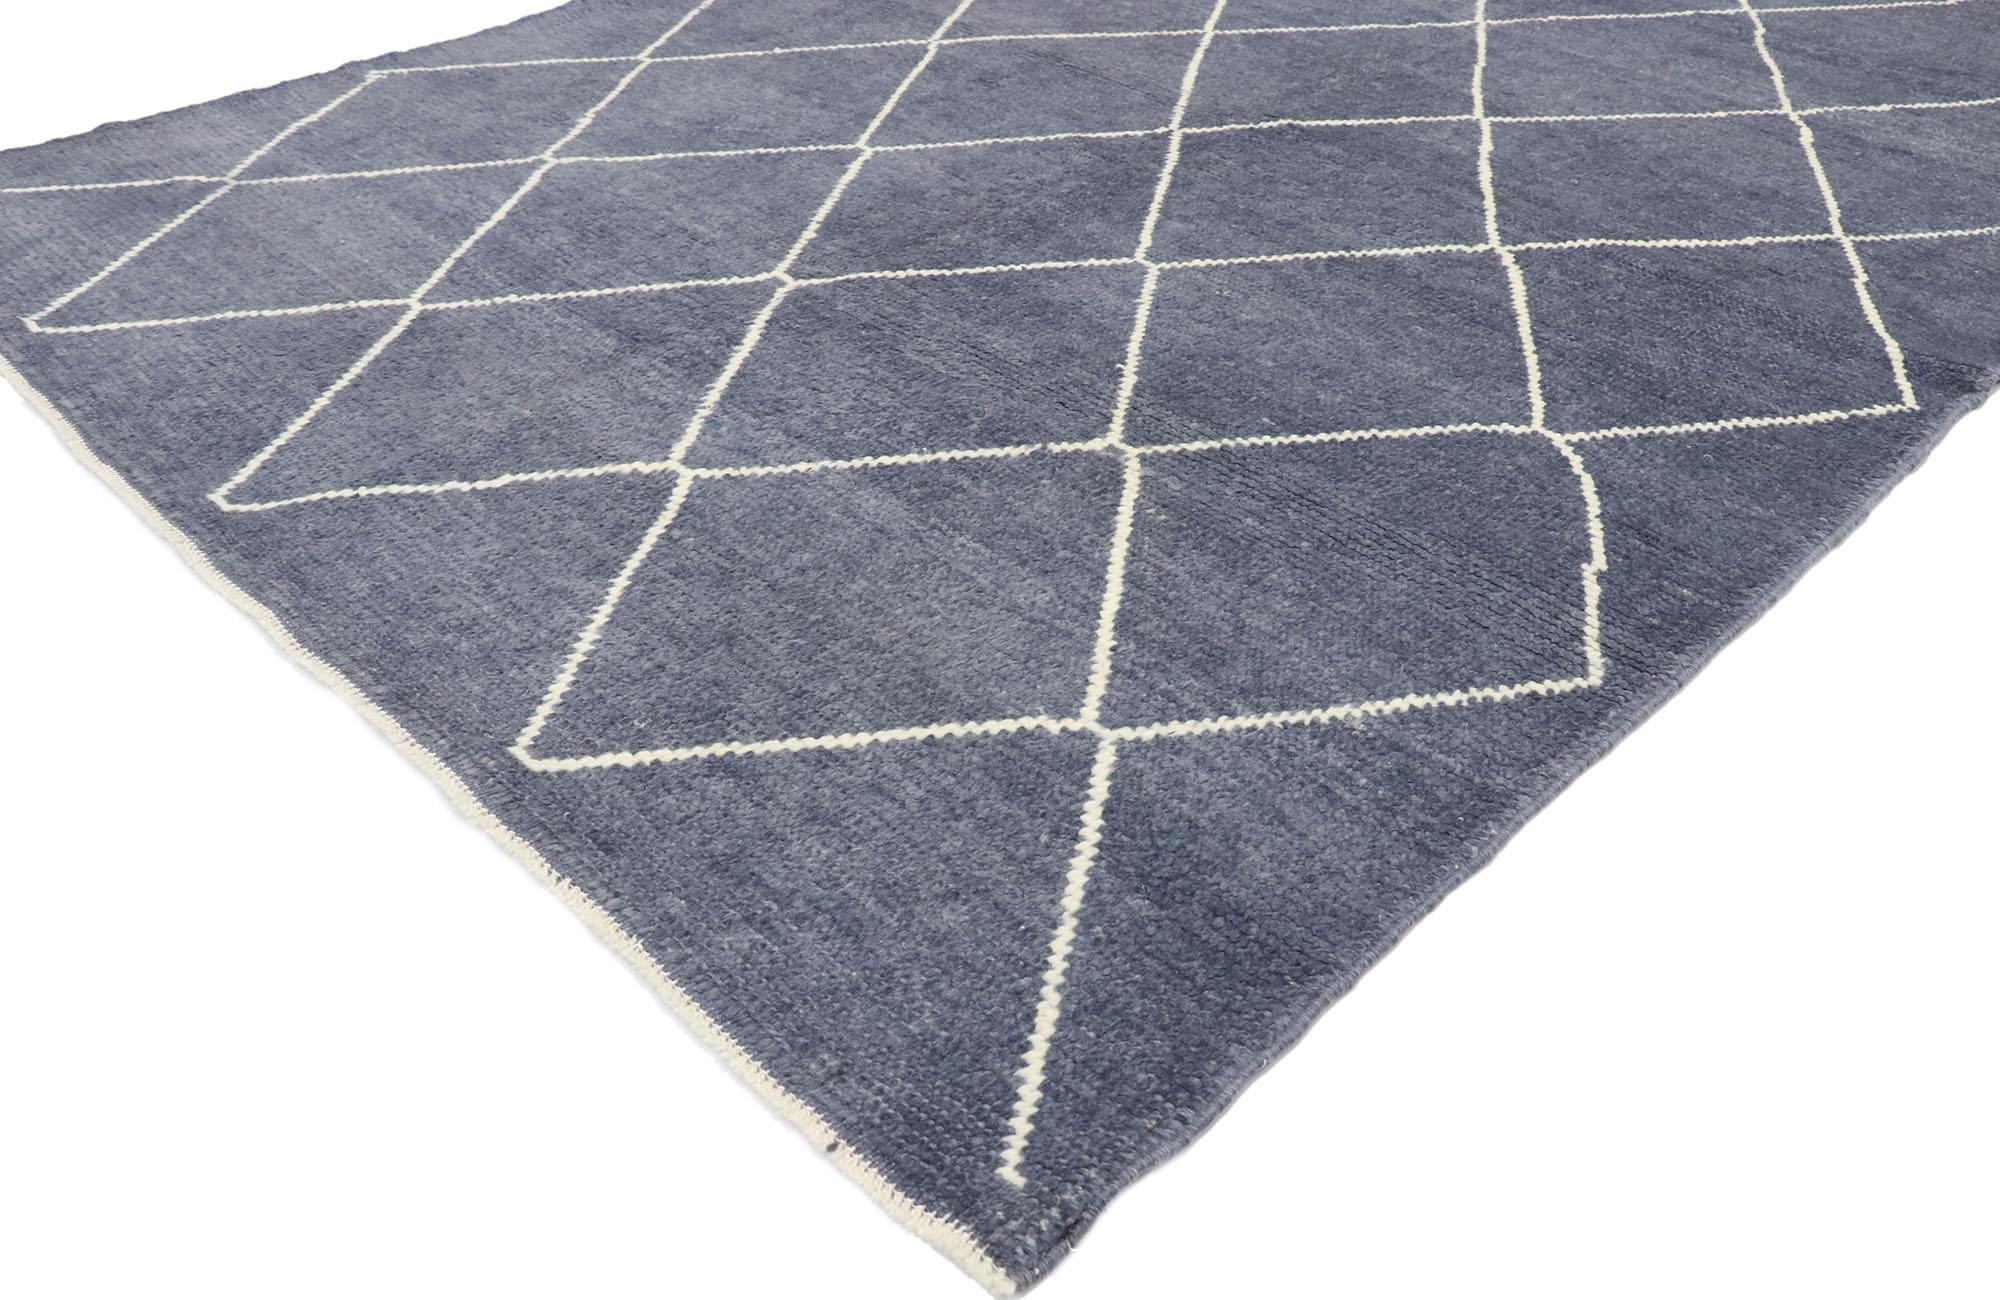 53451 New Contemporary Moroccan style rug with Diamond Trellis 05'03 x 07'06. Simplicity meets incredible detail and texture in this hand knotted wool contemporary Moroccan rug. The abrashed navy blue field is covered in a diamond trellis comprised